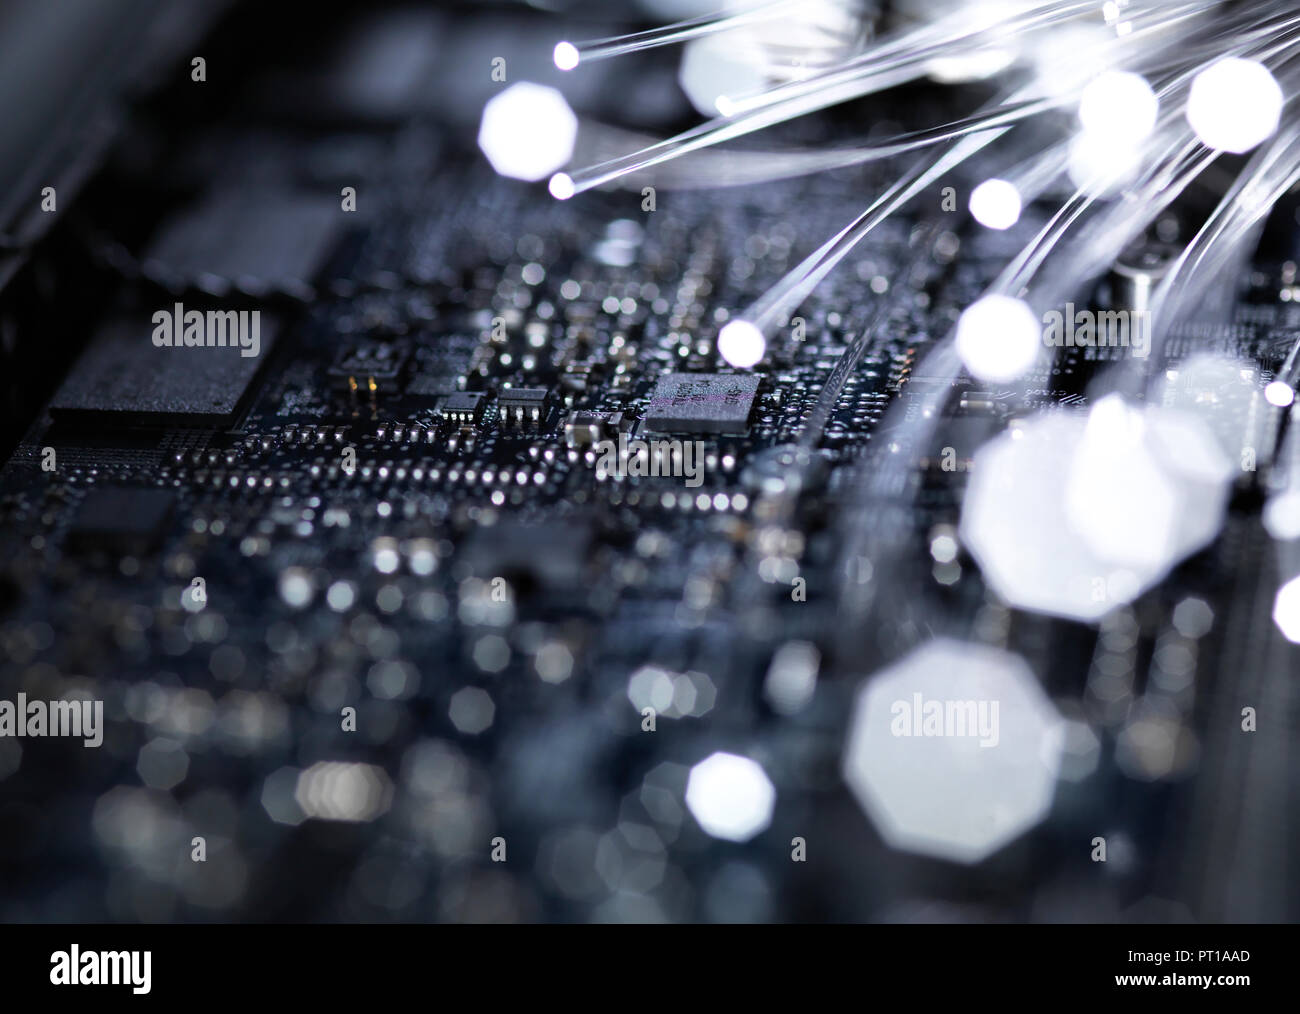 Fibre optics, hardware, mother board in the background Stock Photo